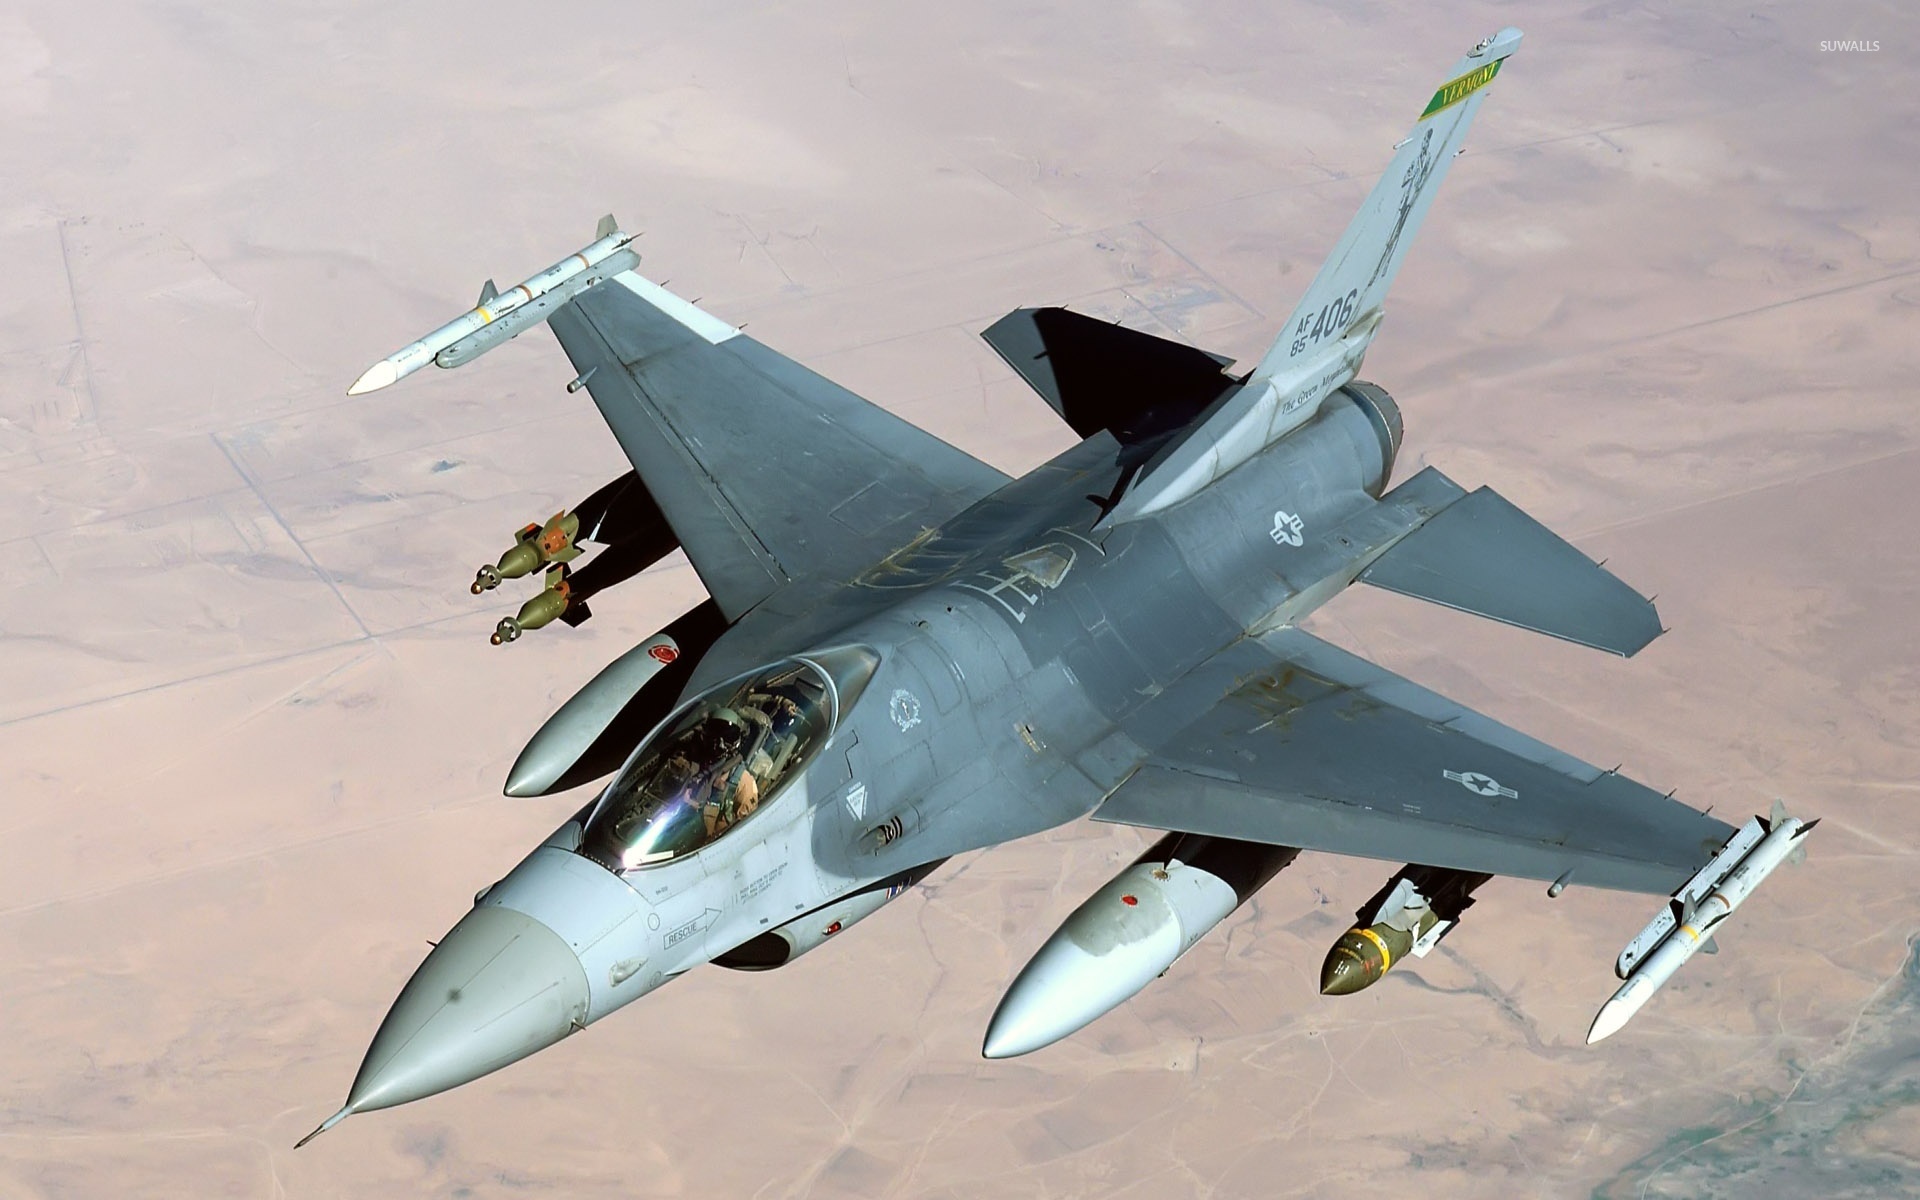 General Dynamics F-16 Fighting Falcon Backgrounds on Wallpapers Vista